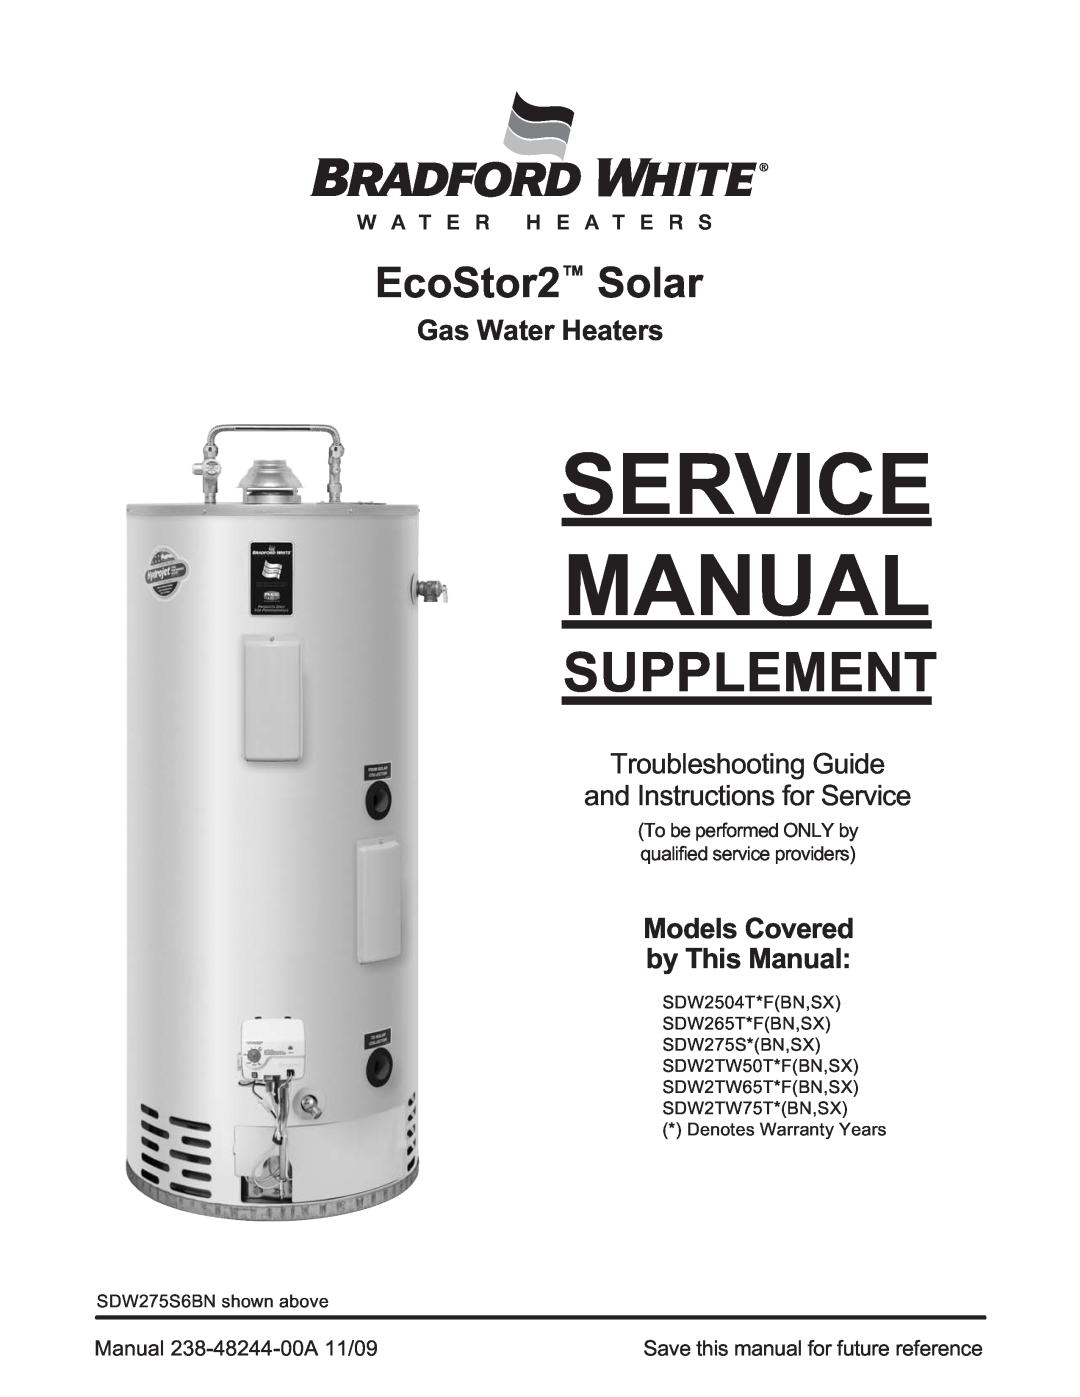 Bradford-White Corp SDW275S service manual Troubleshooting Guide and Instructions for Service, Service Manual, Supplement 